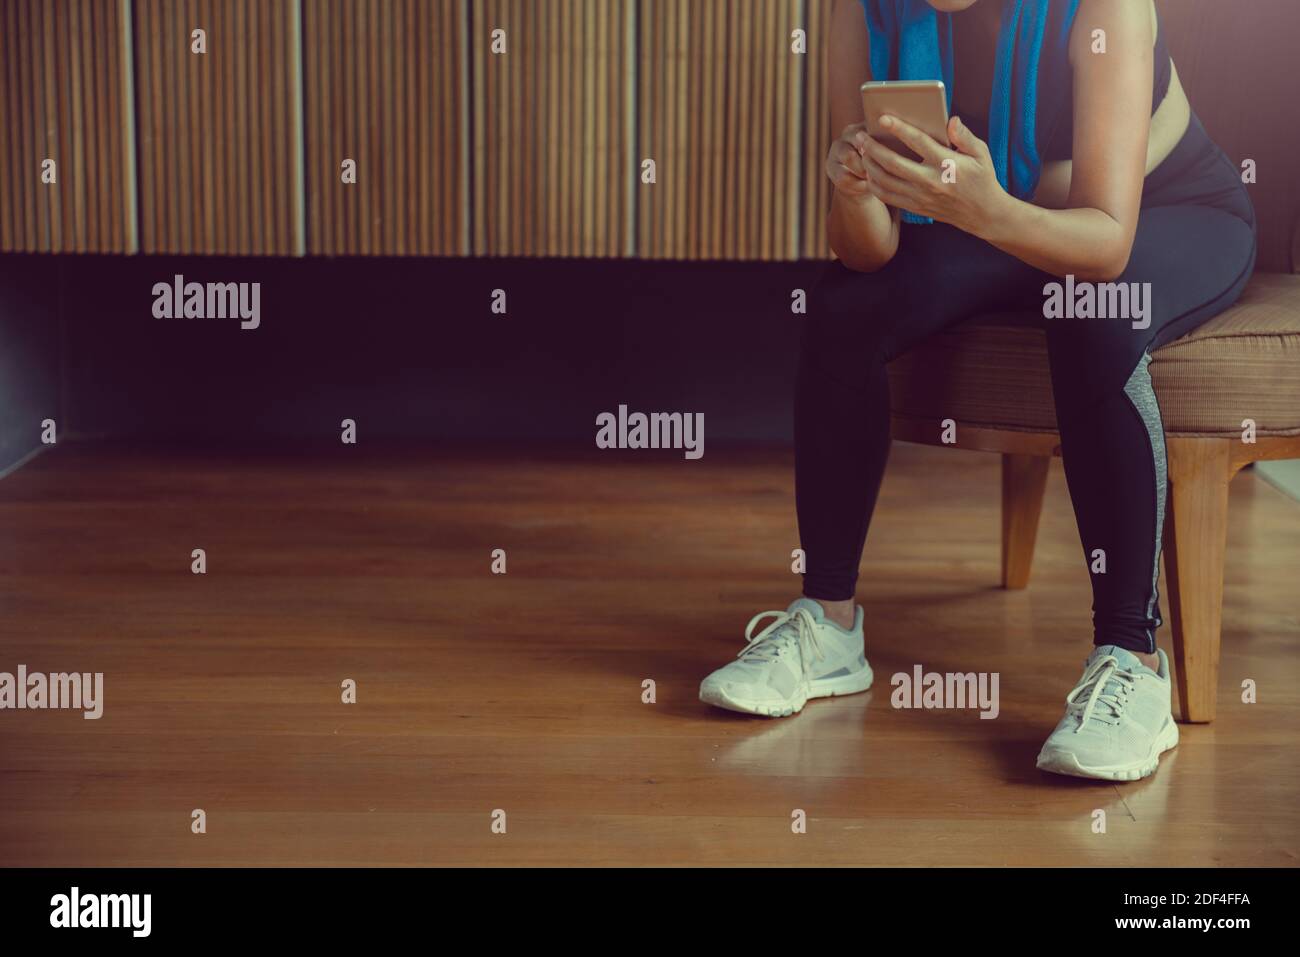 Sportswoman sitting and using smartphone in locker room at gym. Stock Photo